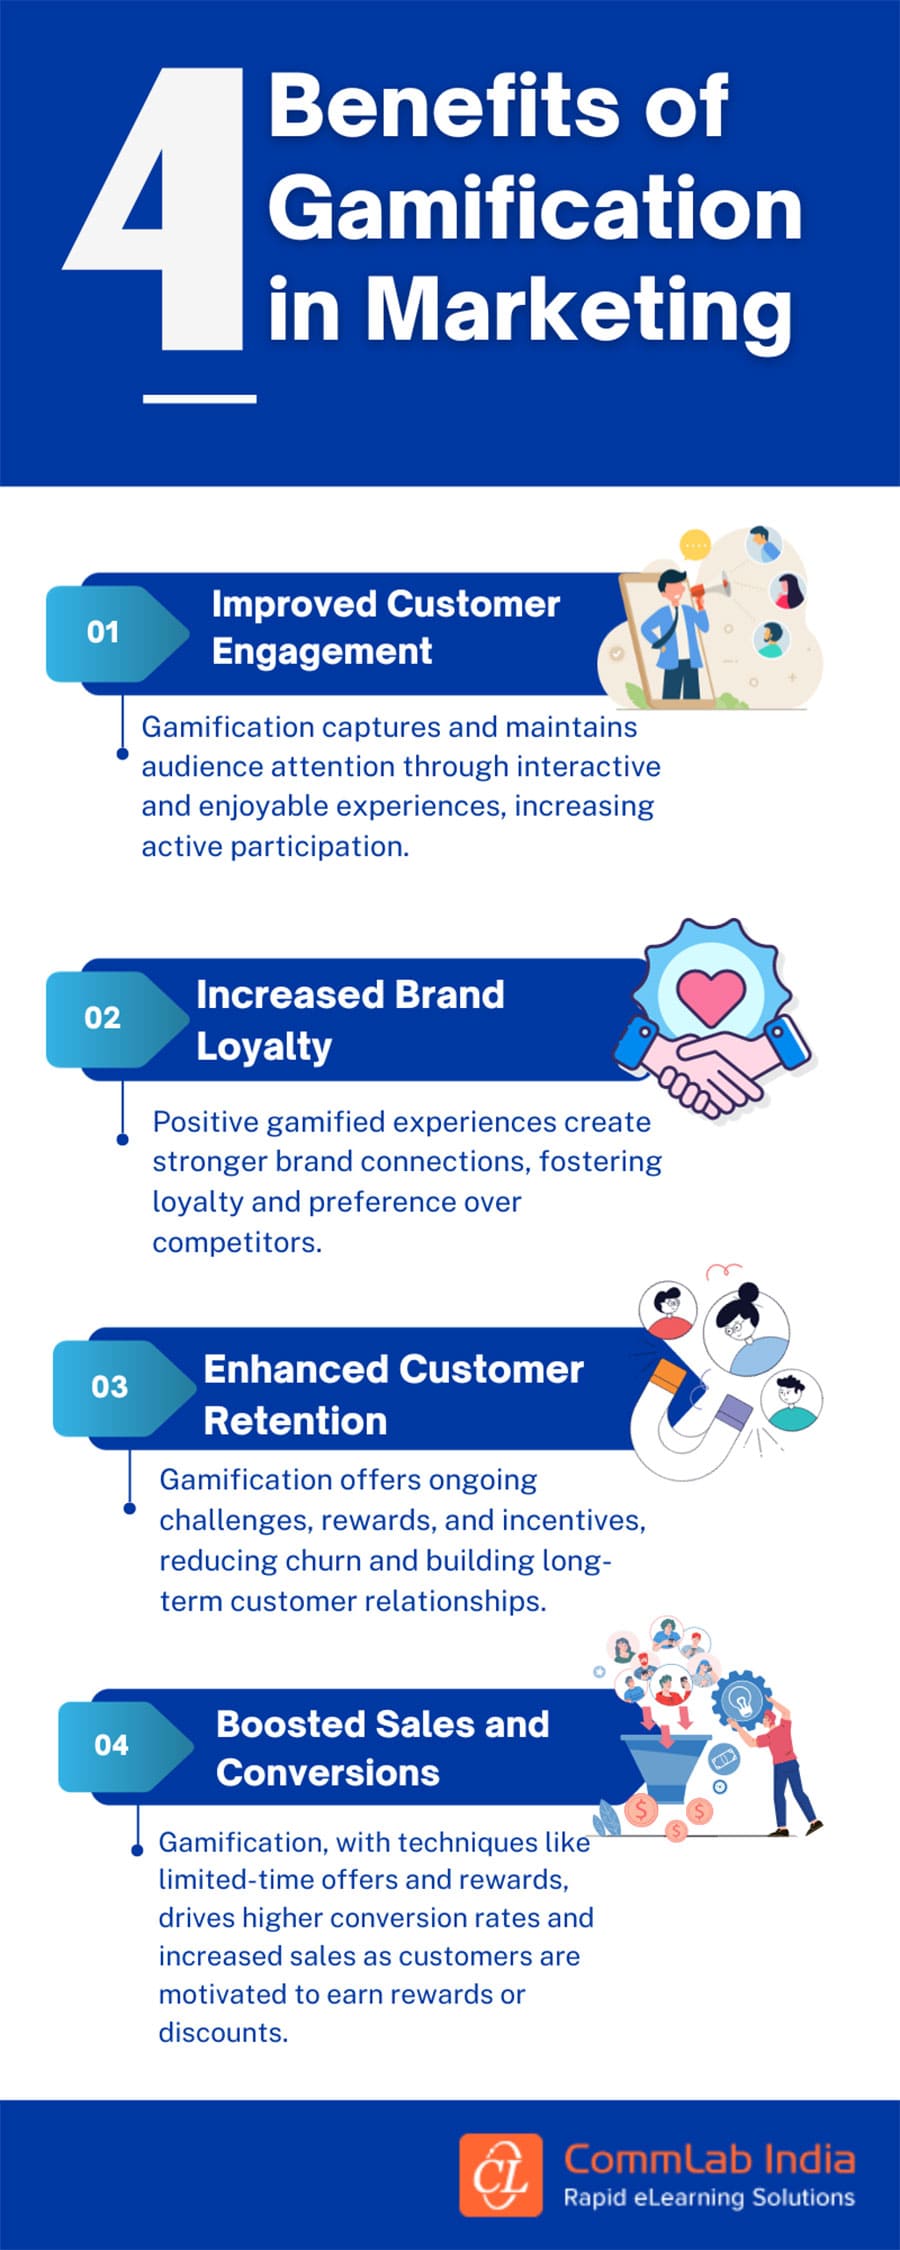 4 Benefits of Gamification in Marketing